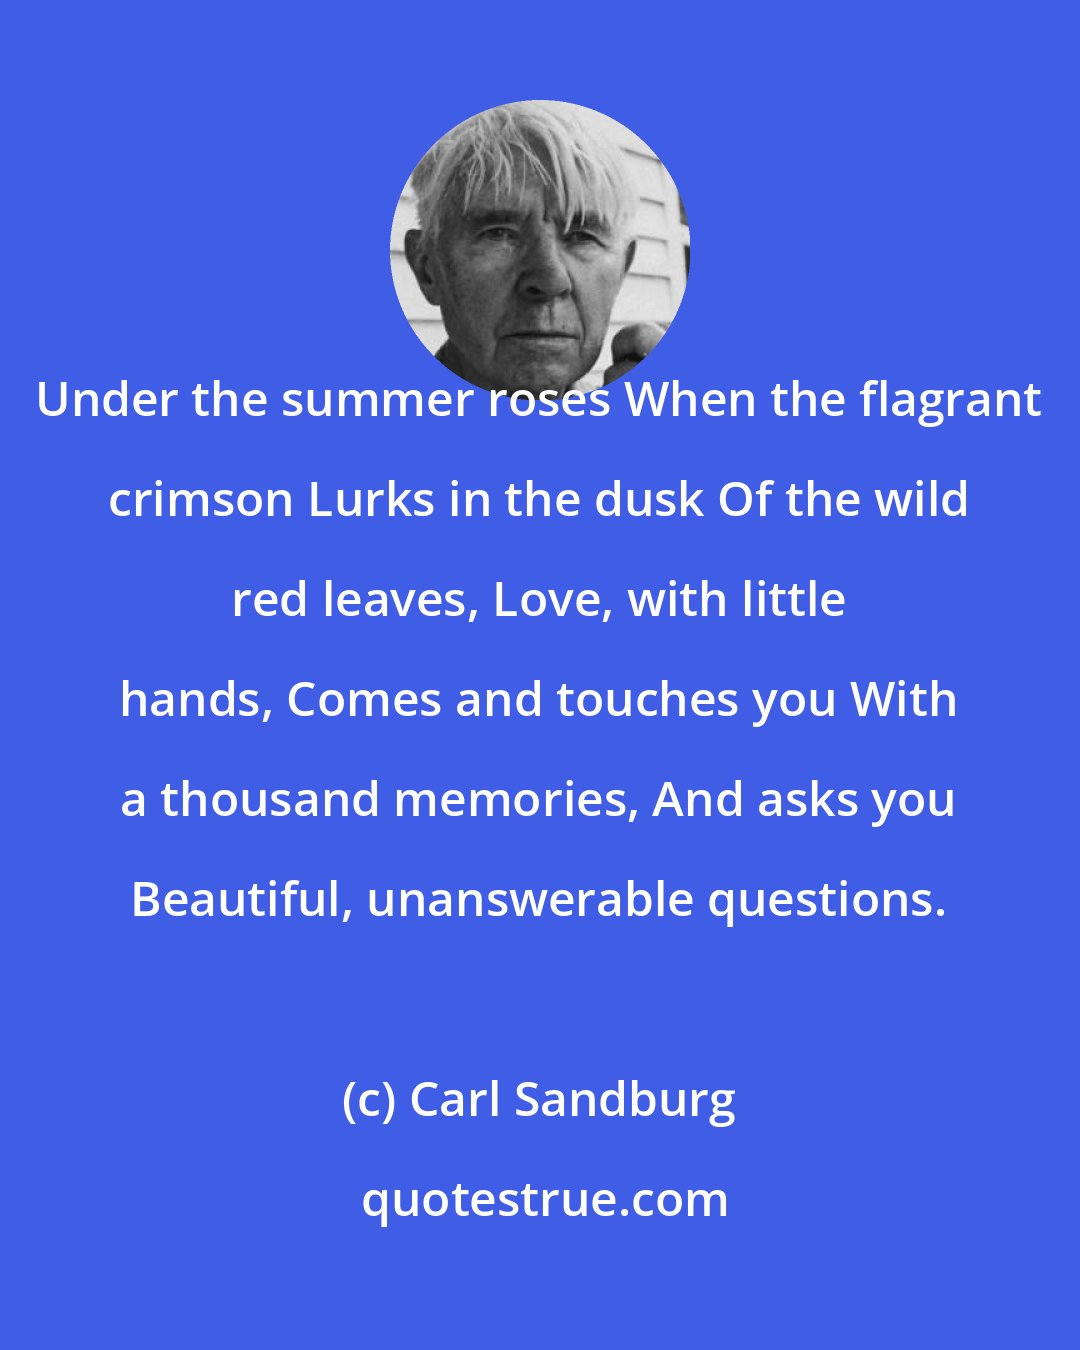 Carl Sandburg: Under the summer roses When the flagrant crimson Lurks in the dusk Of the wild red leaves, Love, with little hands, Comes and touches you With a thousand memories, And asks you Beautiful, unanswerable questions.